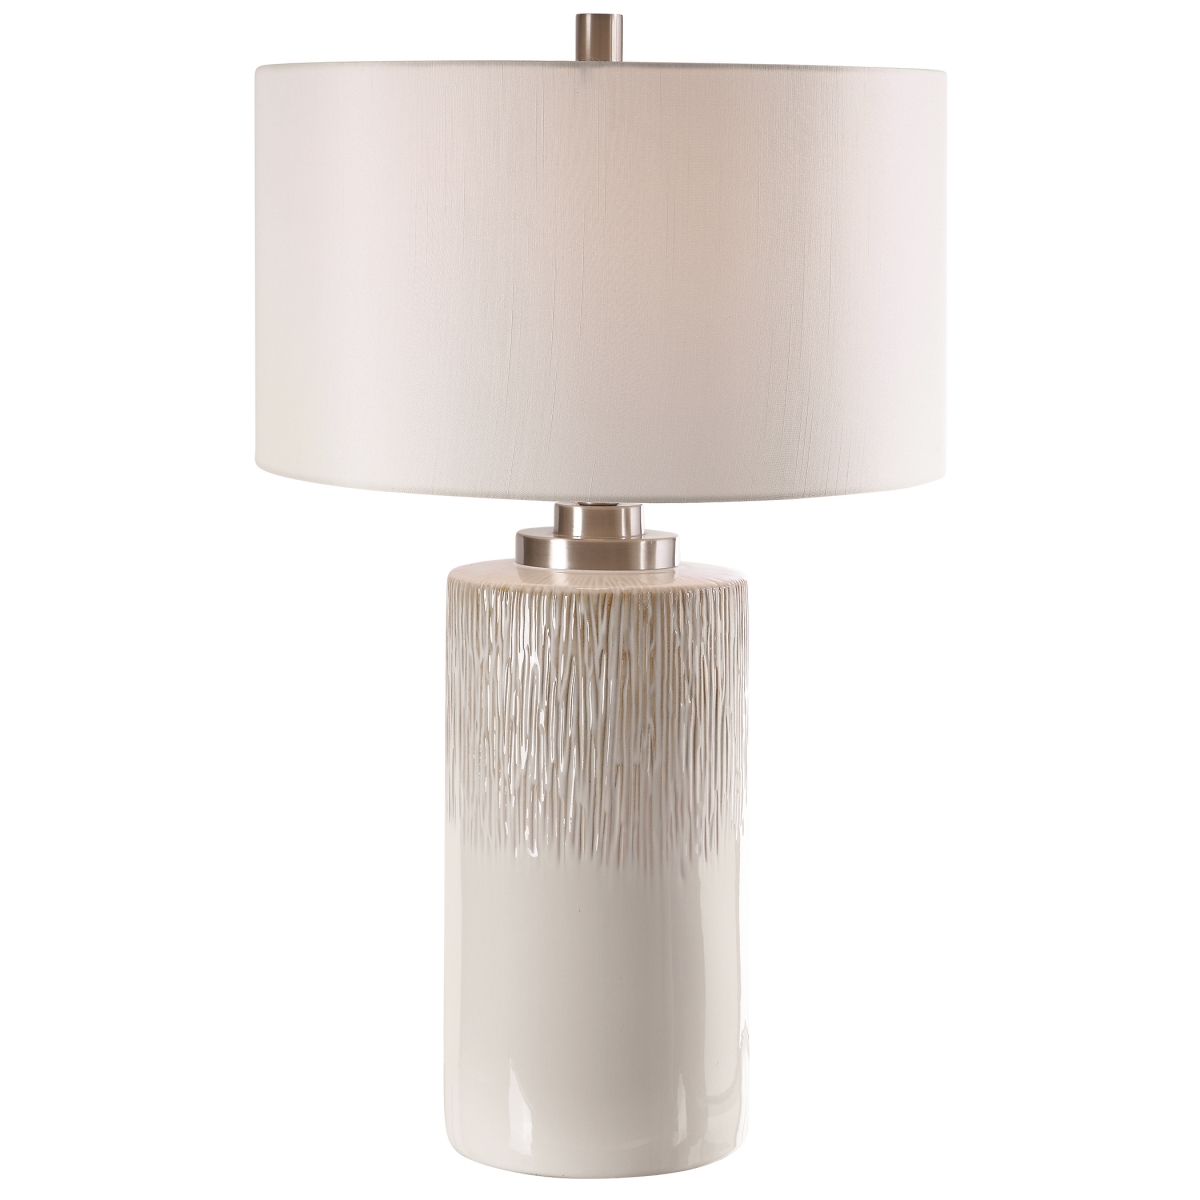 Picture of 212 Main 26354-1 Georgios Cylinder Table Lamp